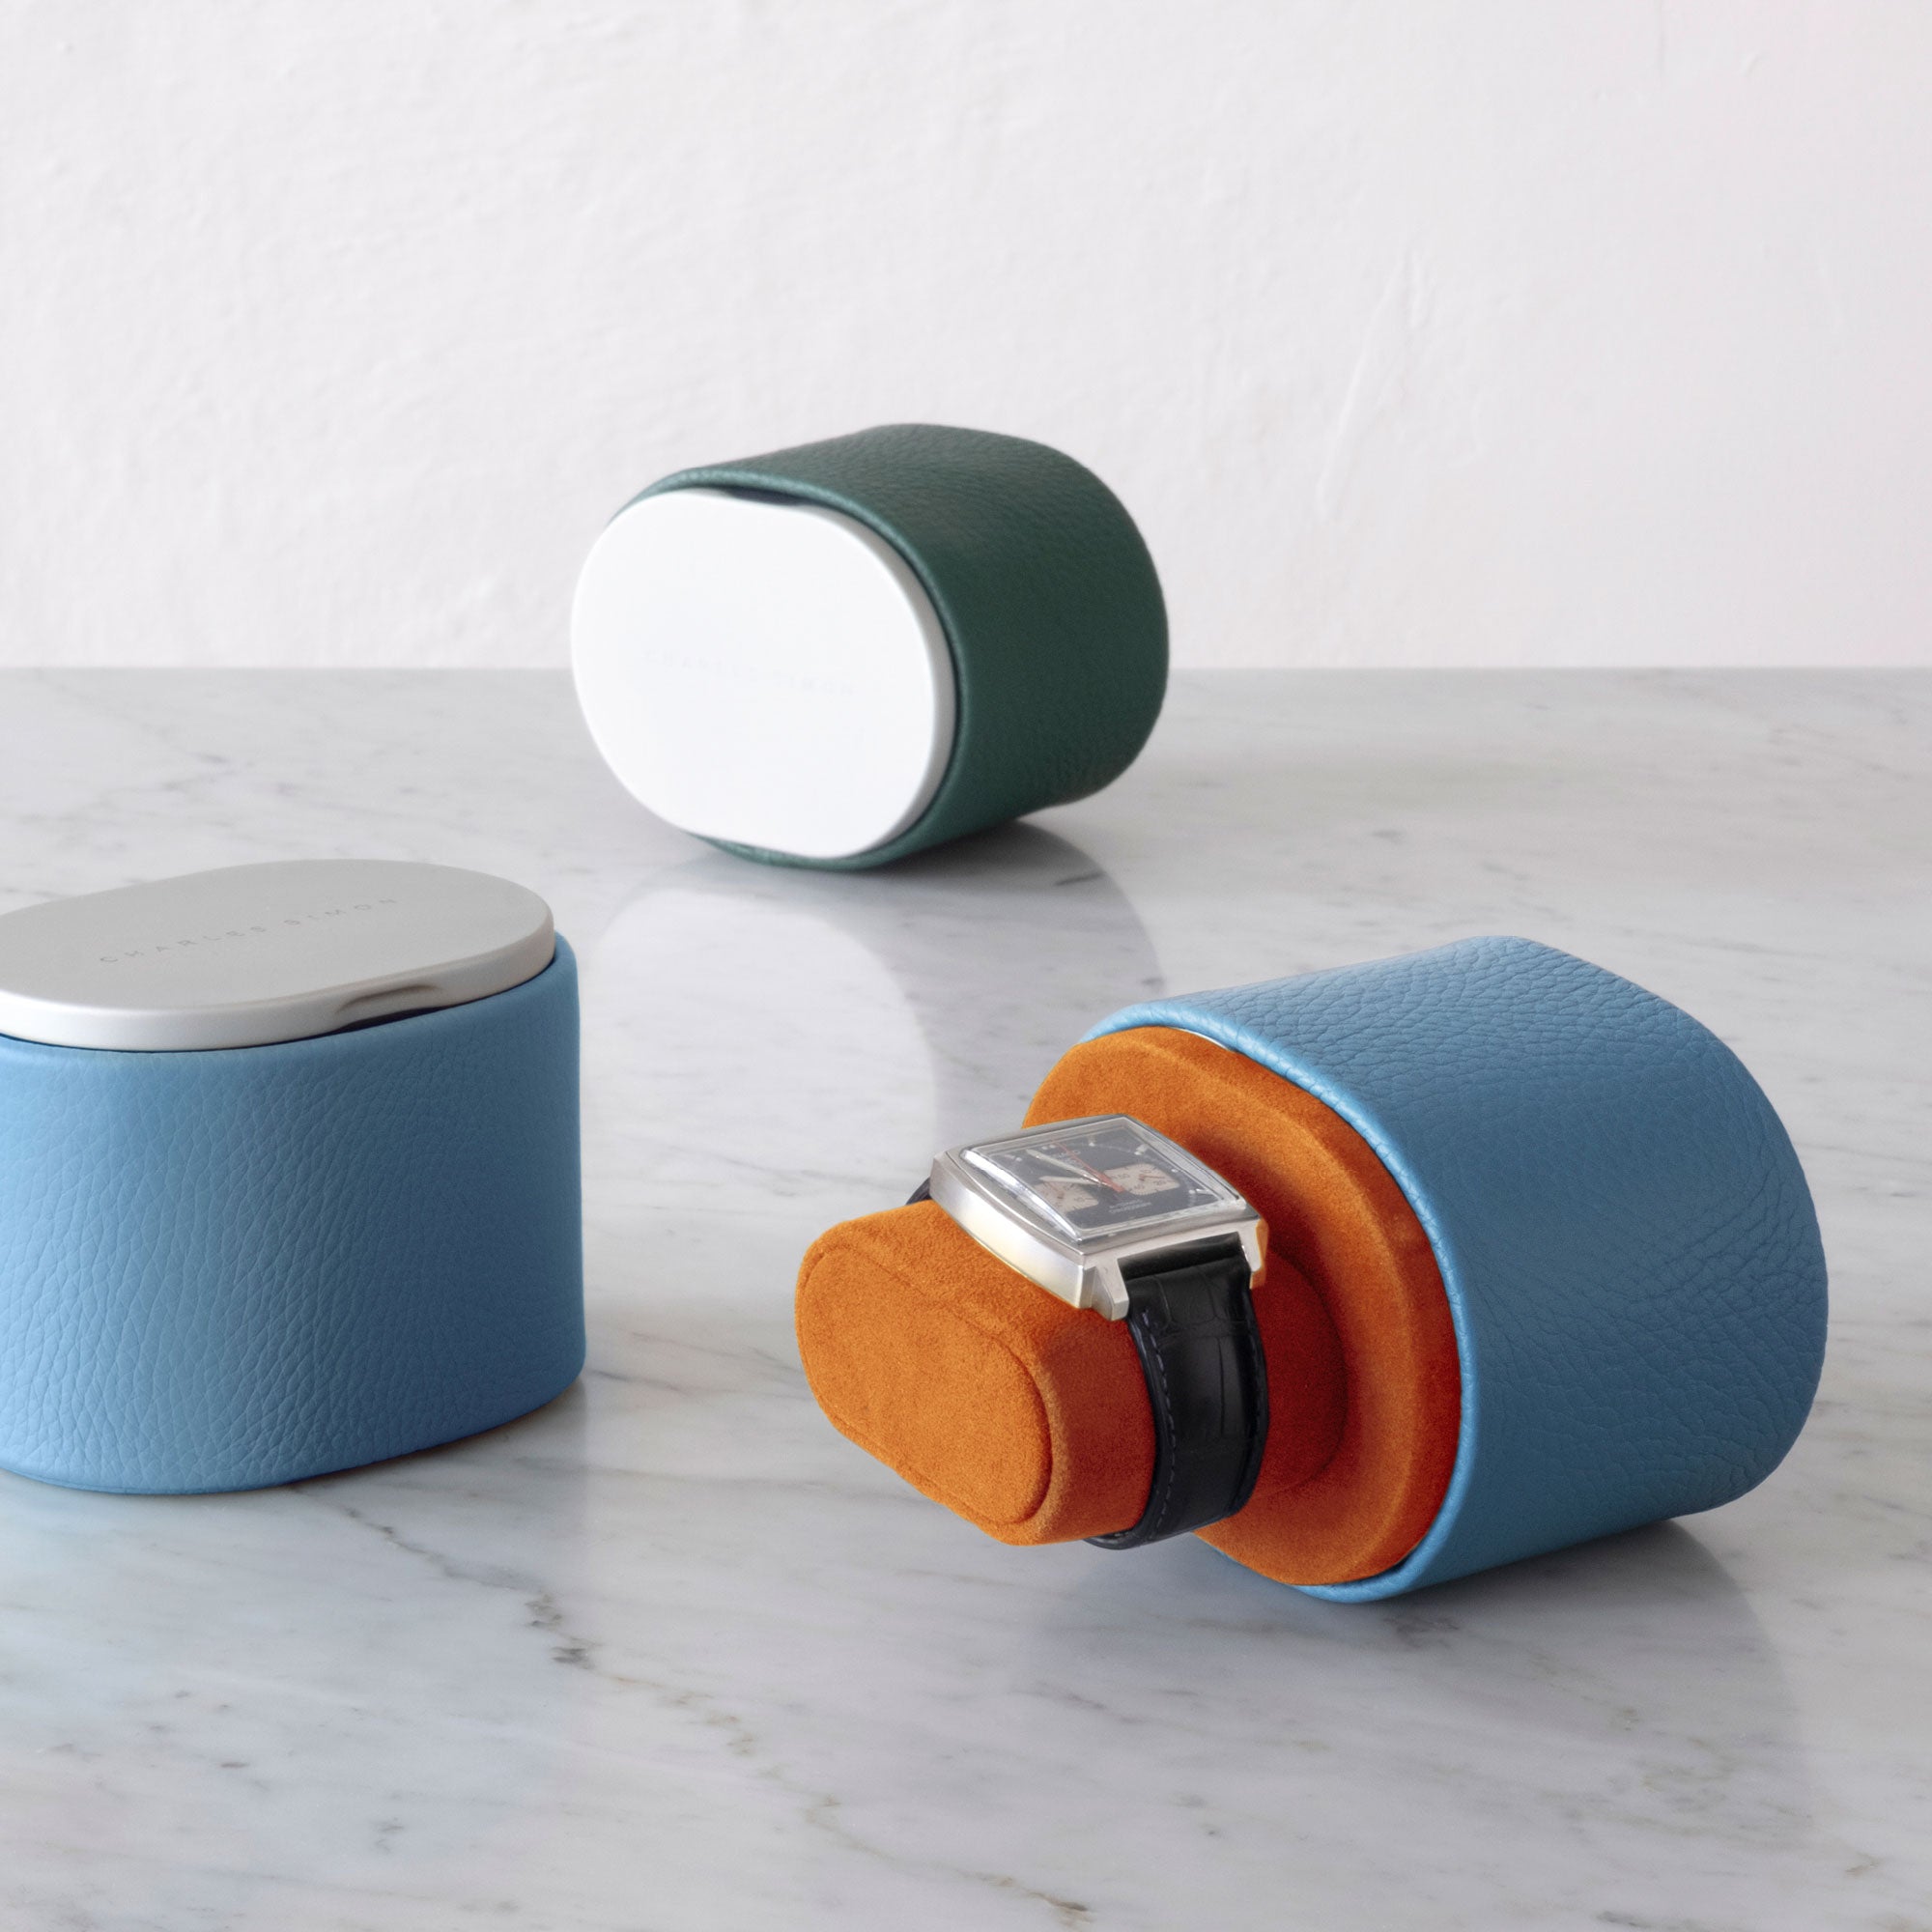 Lifestyle photo of 2 Theo watch rolls. Watch roll in the foreground is made from sky blue leather and open, placed on marble table with luxury watch on Papaya Alcantara cushion. Theo watch roll in the back is closed and made from emerald leather.